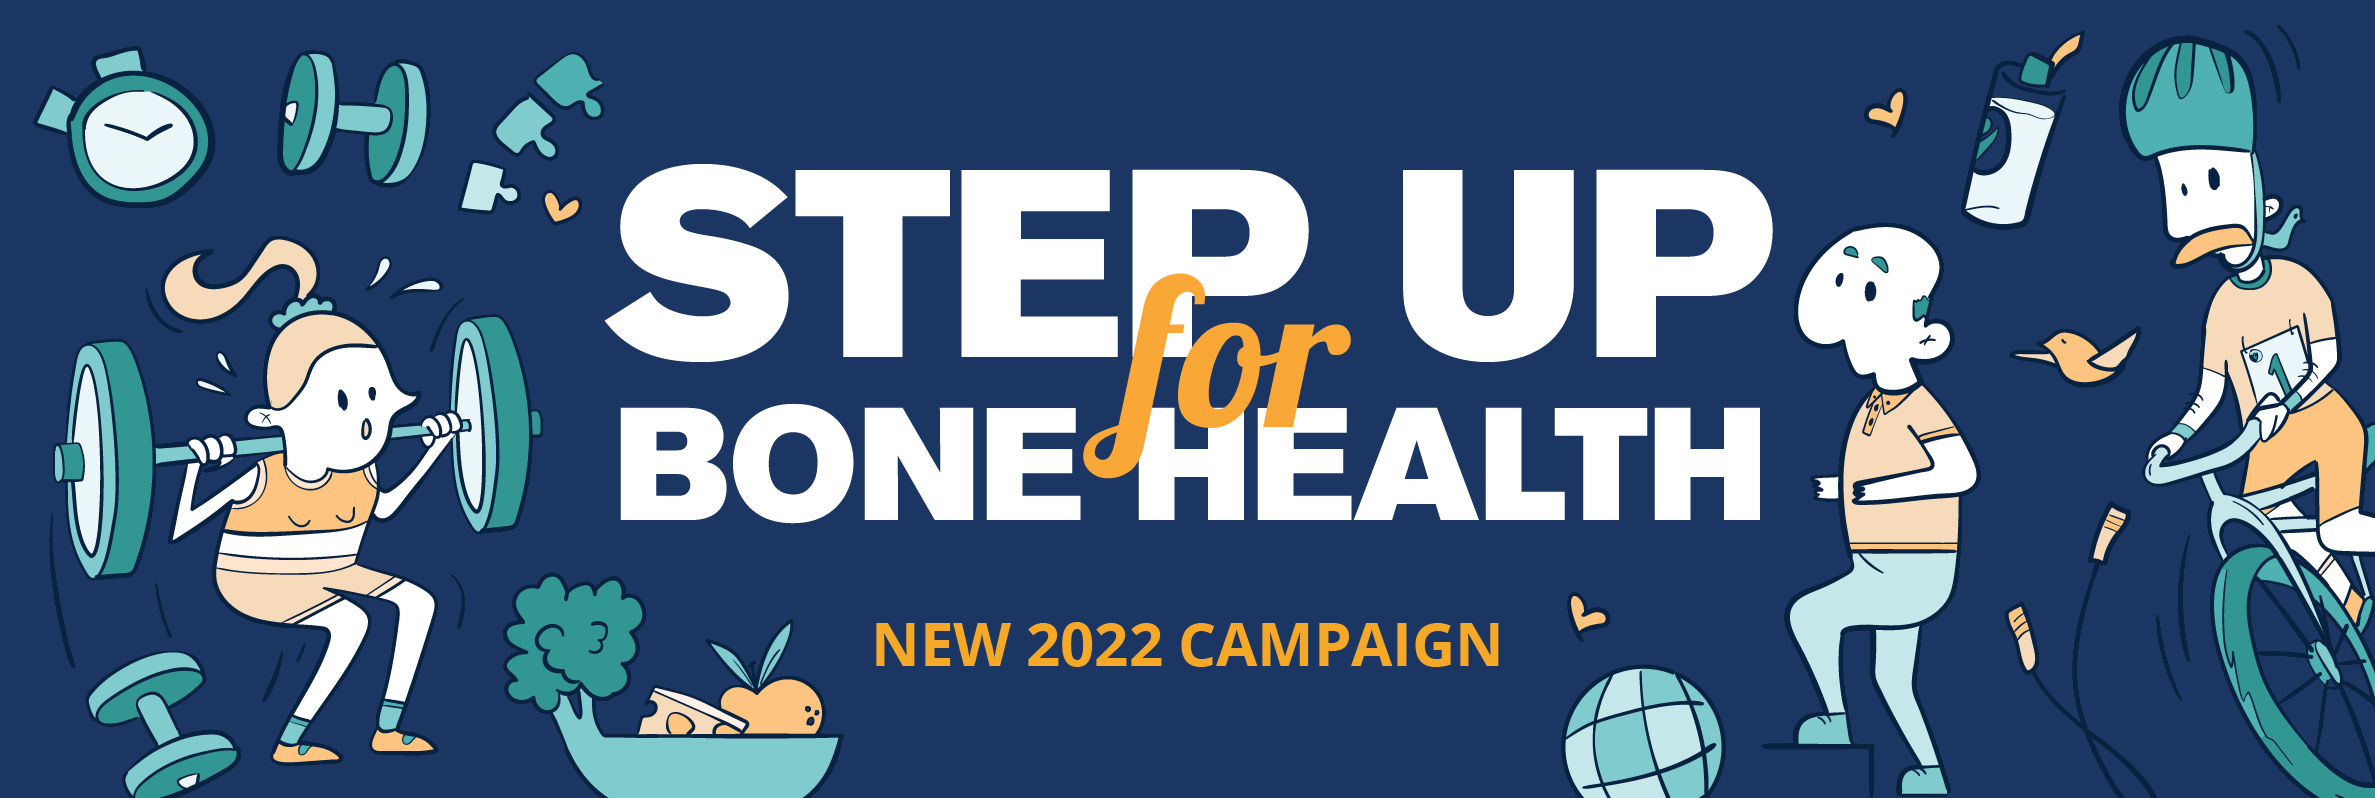 Step Up For Bone Health! - New 2022 Campaign